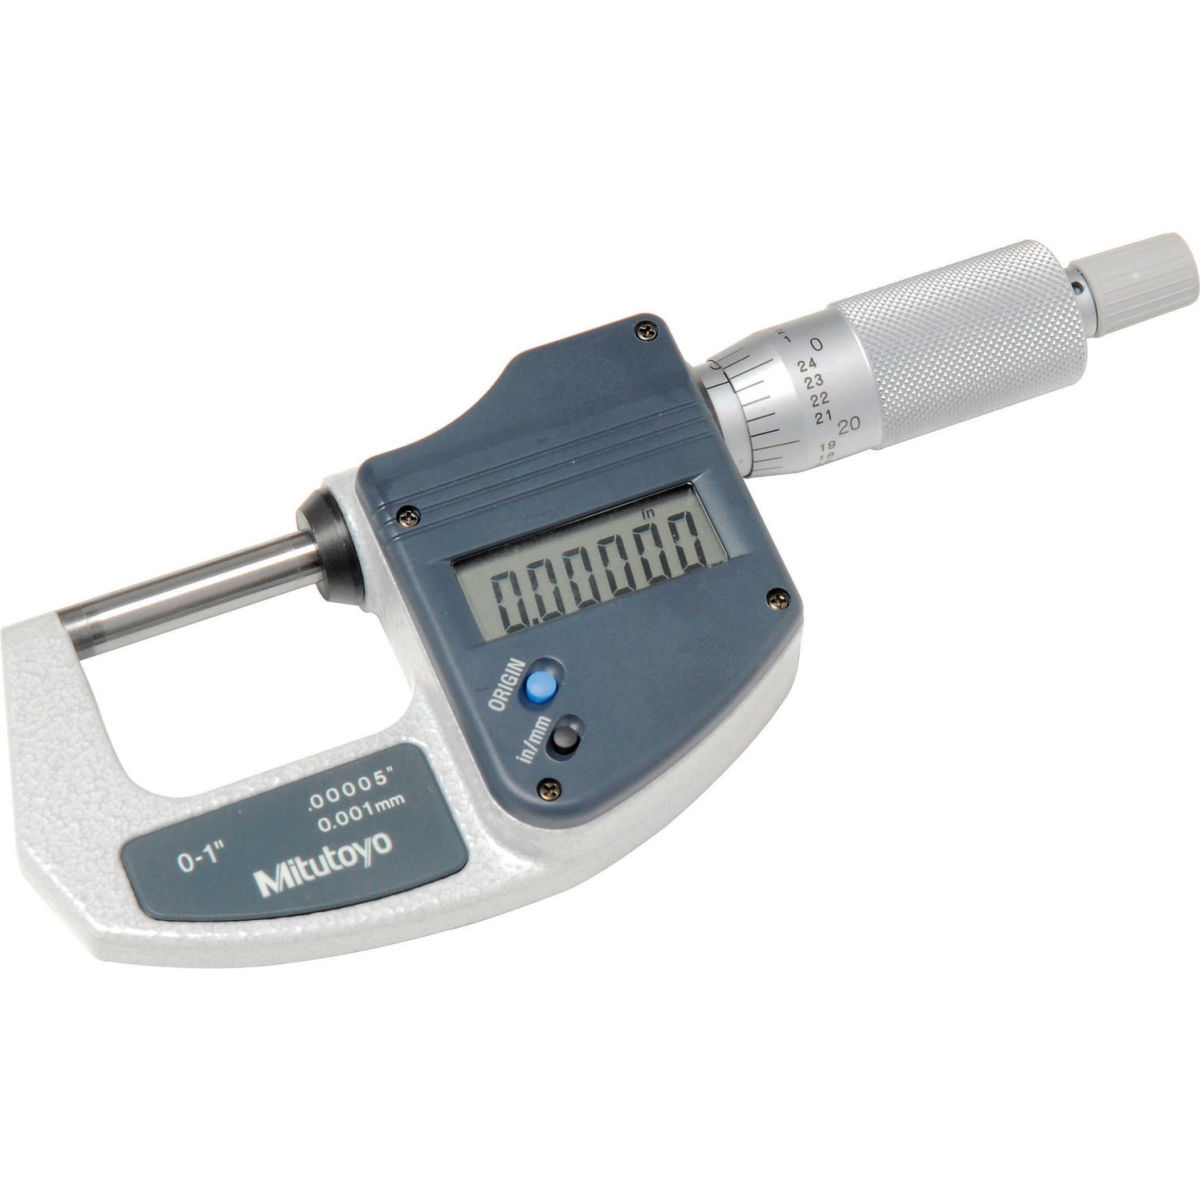 Picture of Mitutoyo America B611563 293-831-30 Digimatic 0-1 in. & 25.4 mm Digital Micrometer with Ratchet Stop Thimble